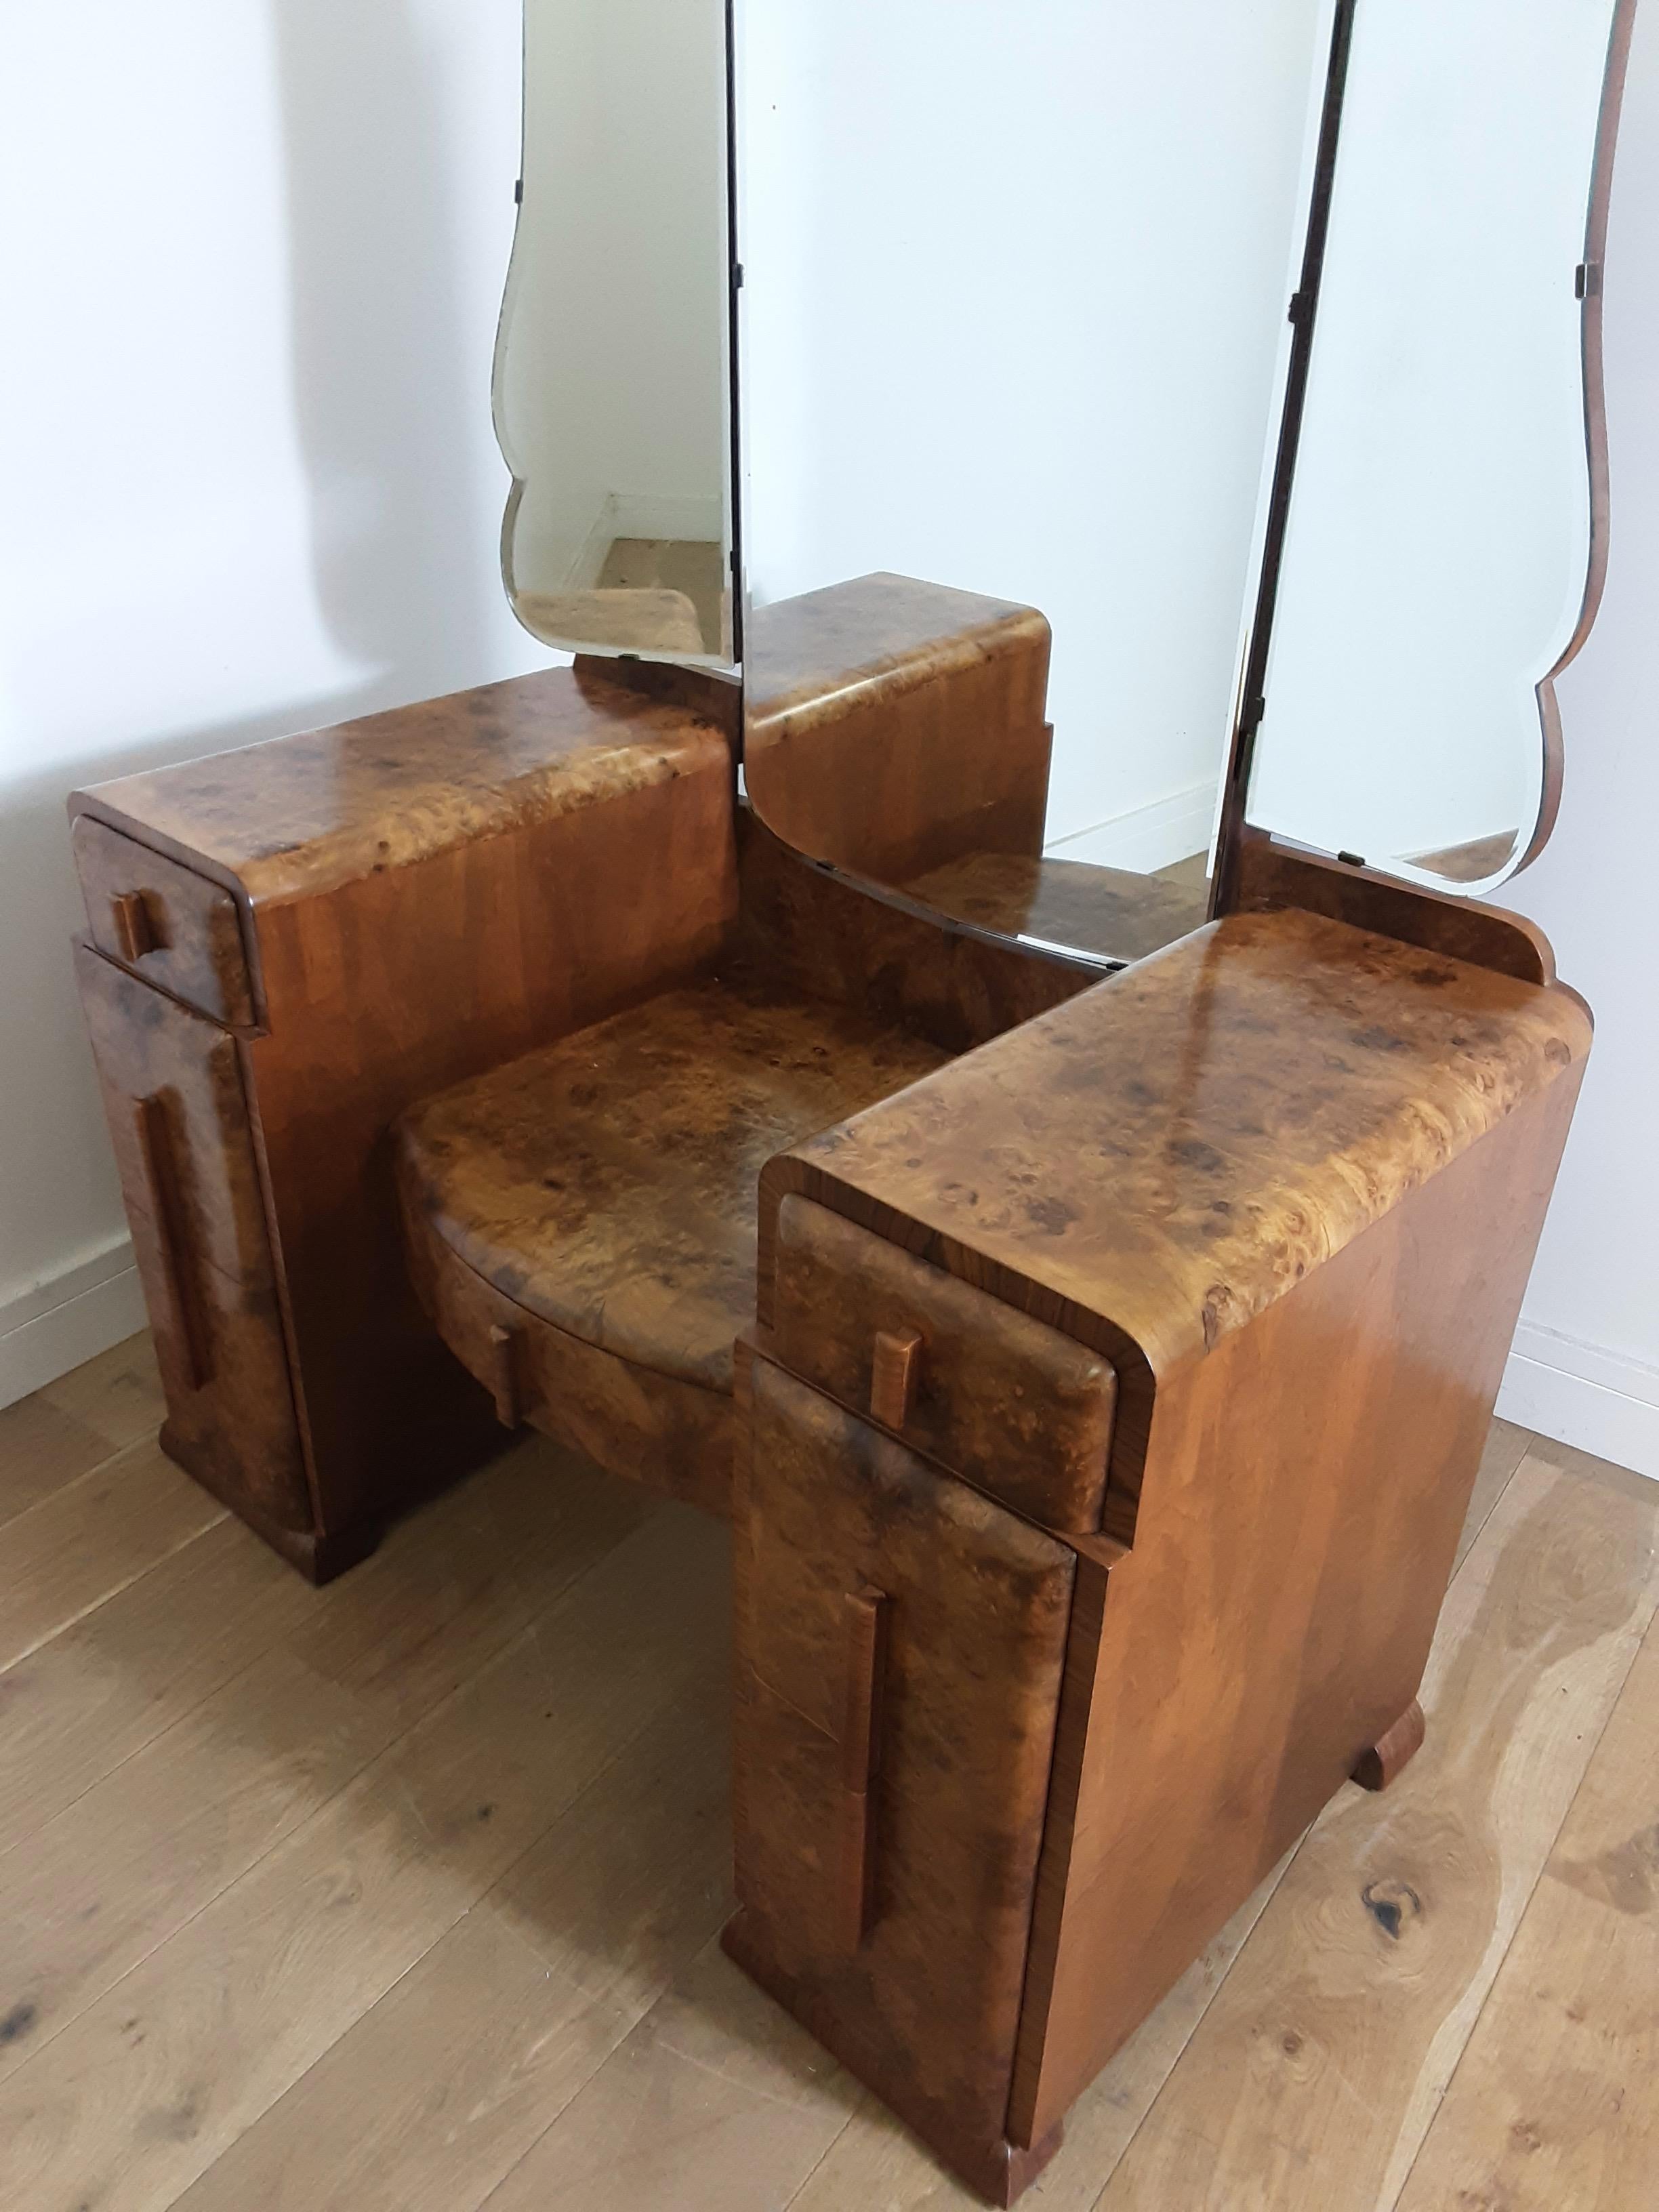 20th Century Art Deco Burr Walnut Dressing Table by Grange Furnishing Stores, London For Sale